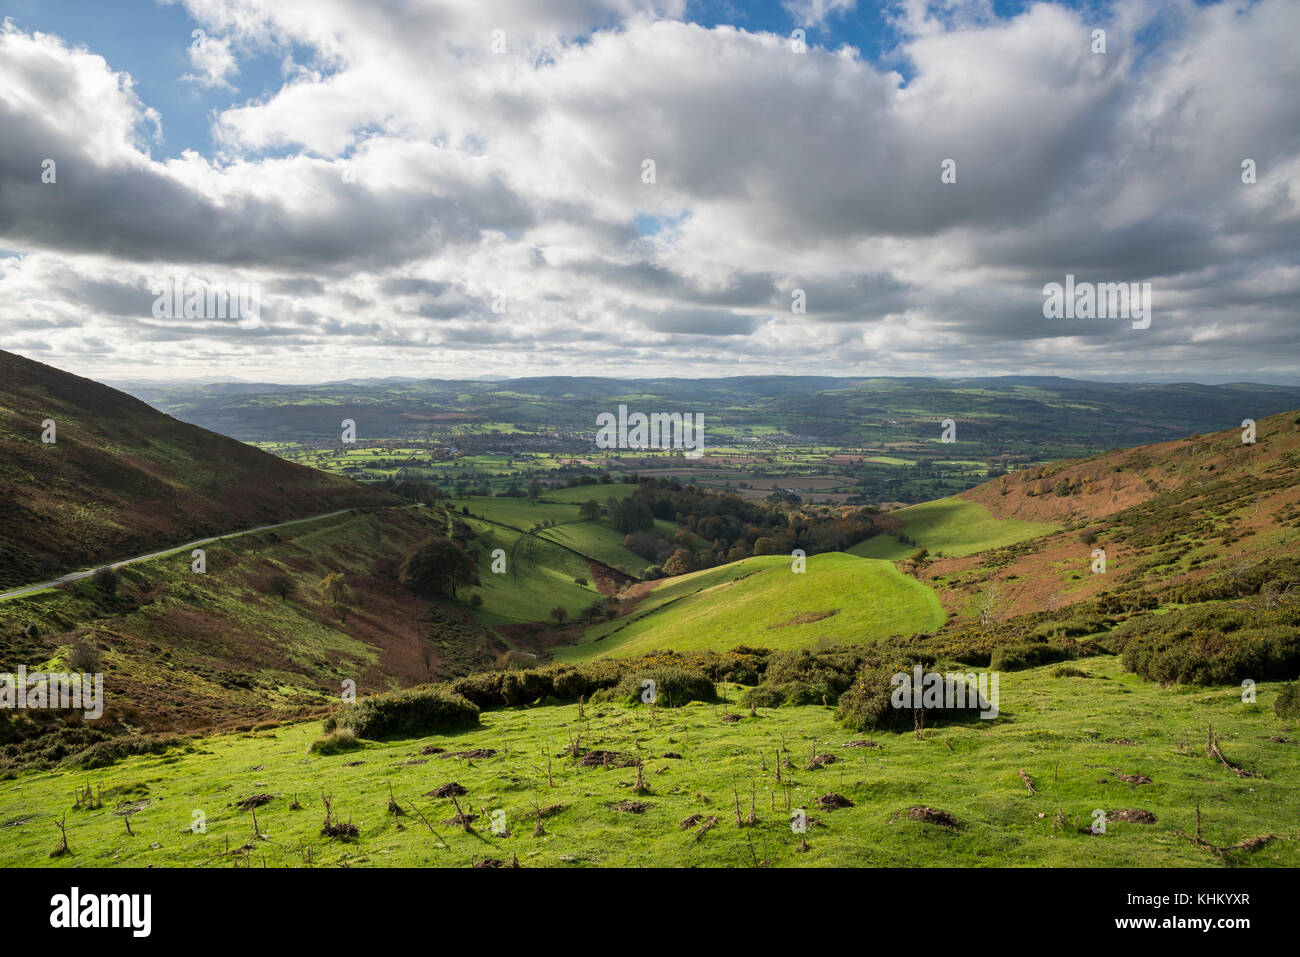 Viewpoint at Bwlch Penbarra car park at Moel Famau country park, Wales. Beautiful view of the Vale of Clwyd. Stock Photo